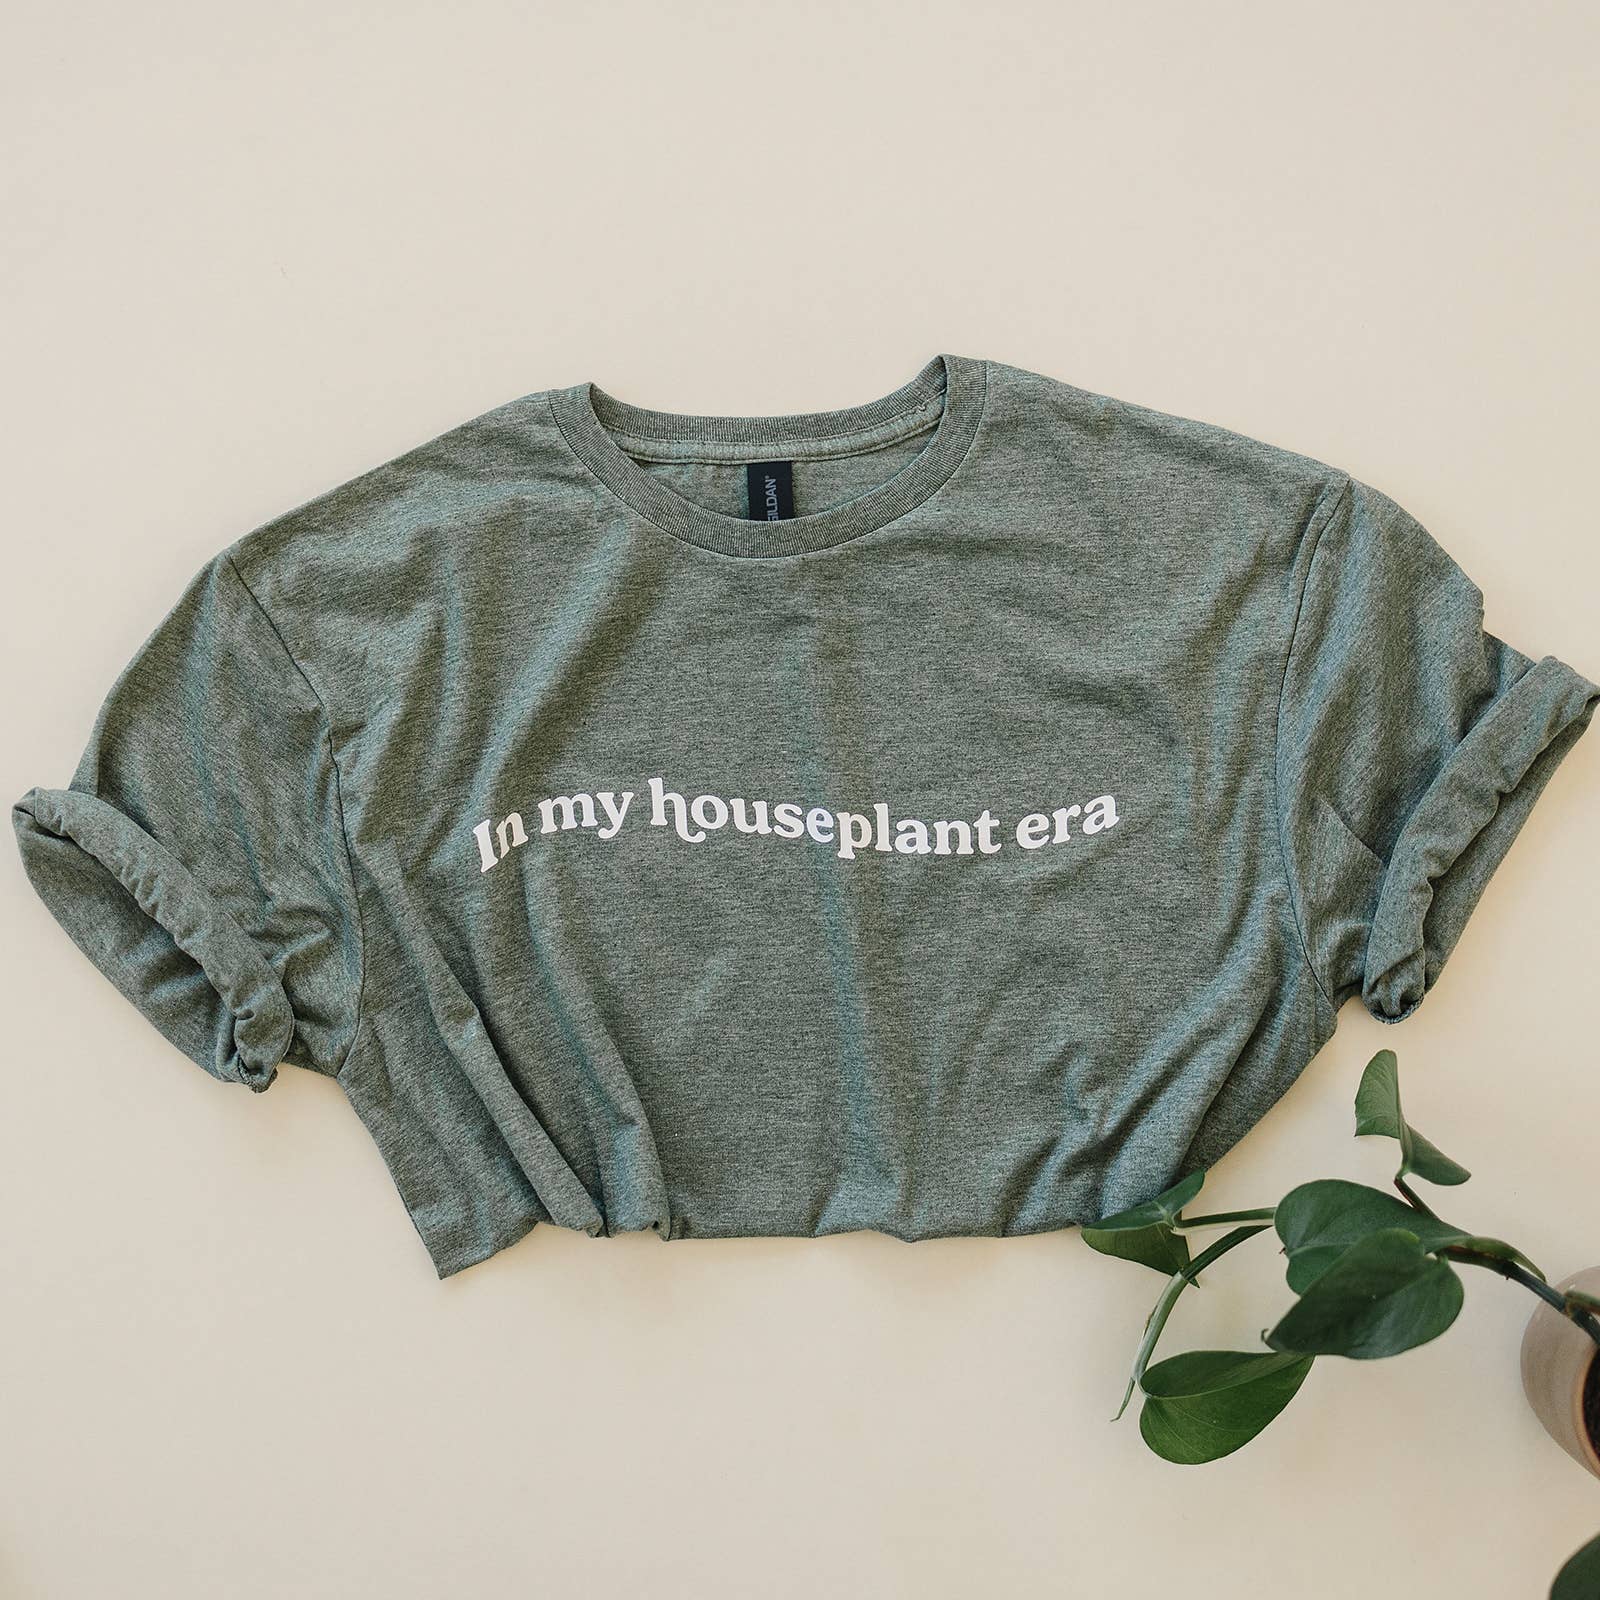 Packer Plant Co - Houseplant Era Graphic T-Shirt | Gifts for Plant Lovers: Heather Military Green / XL